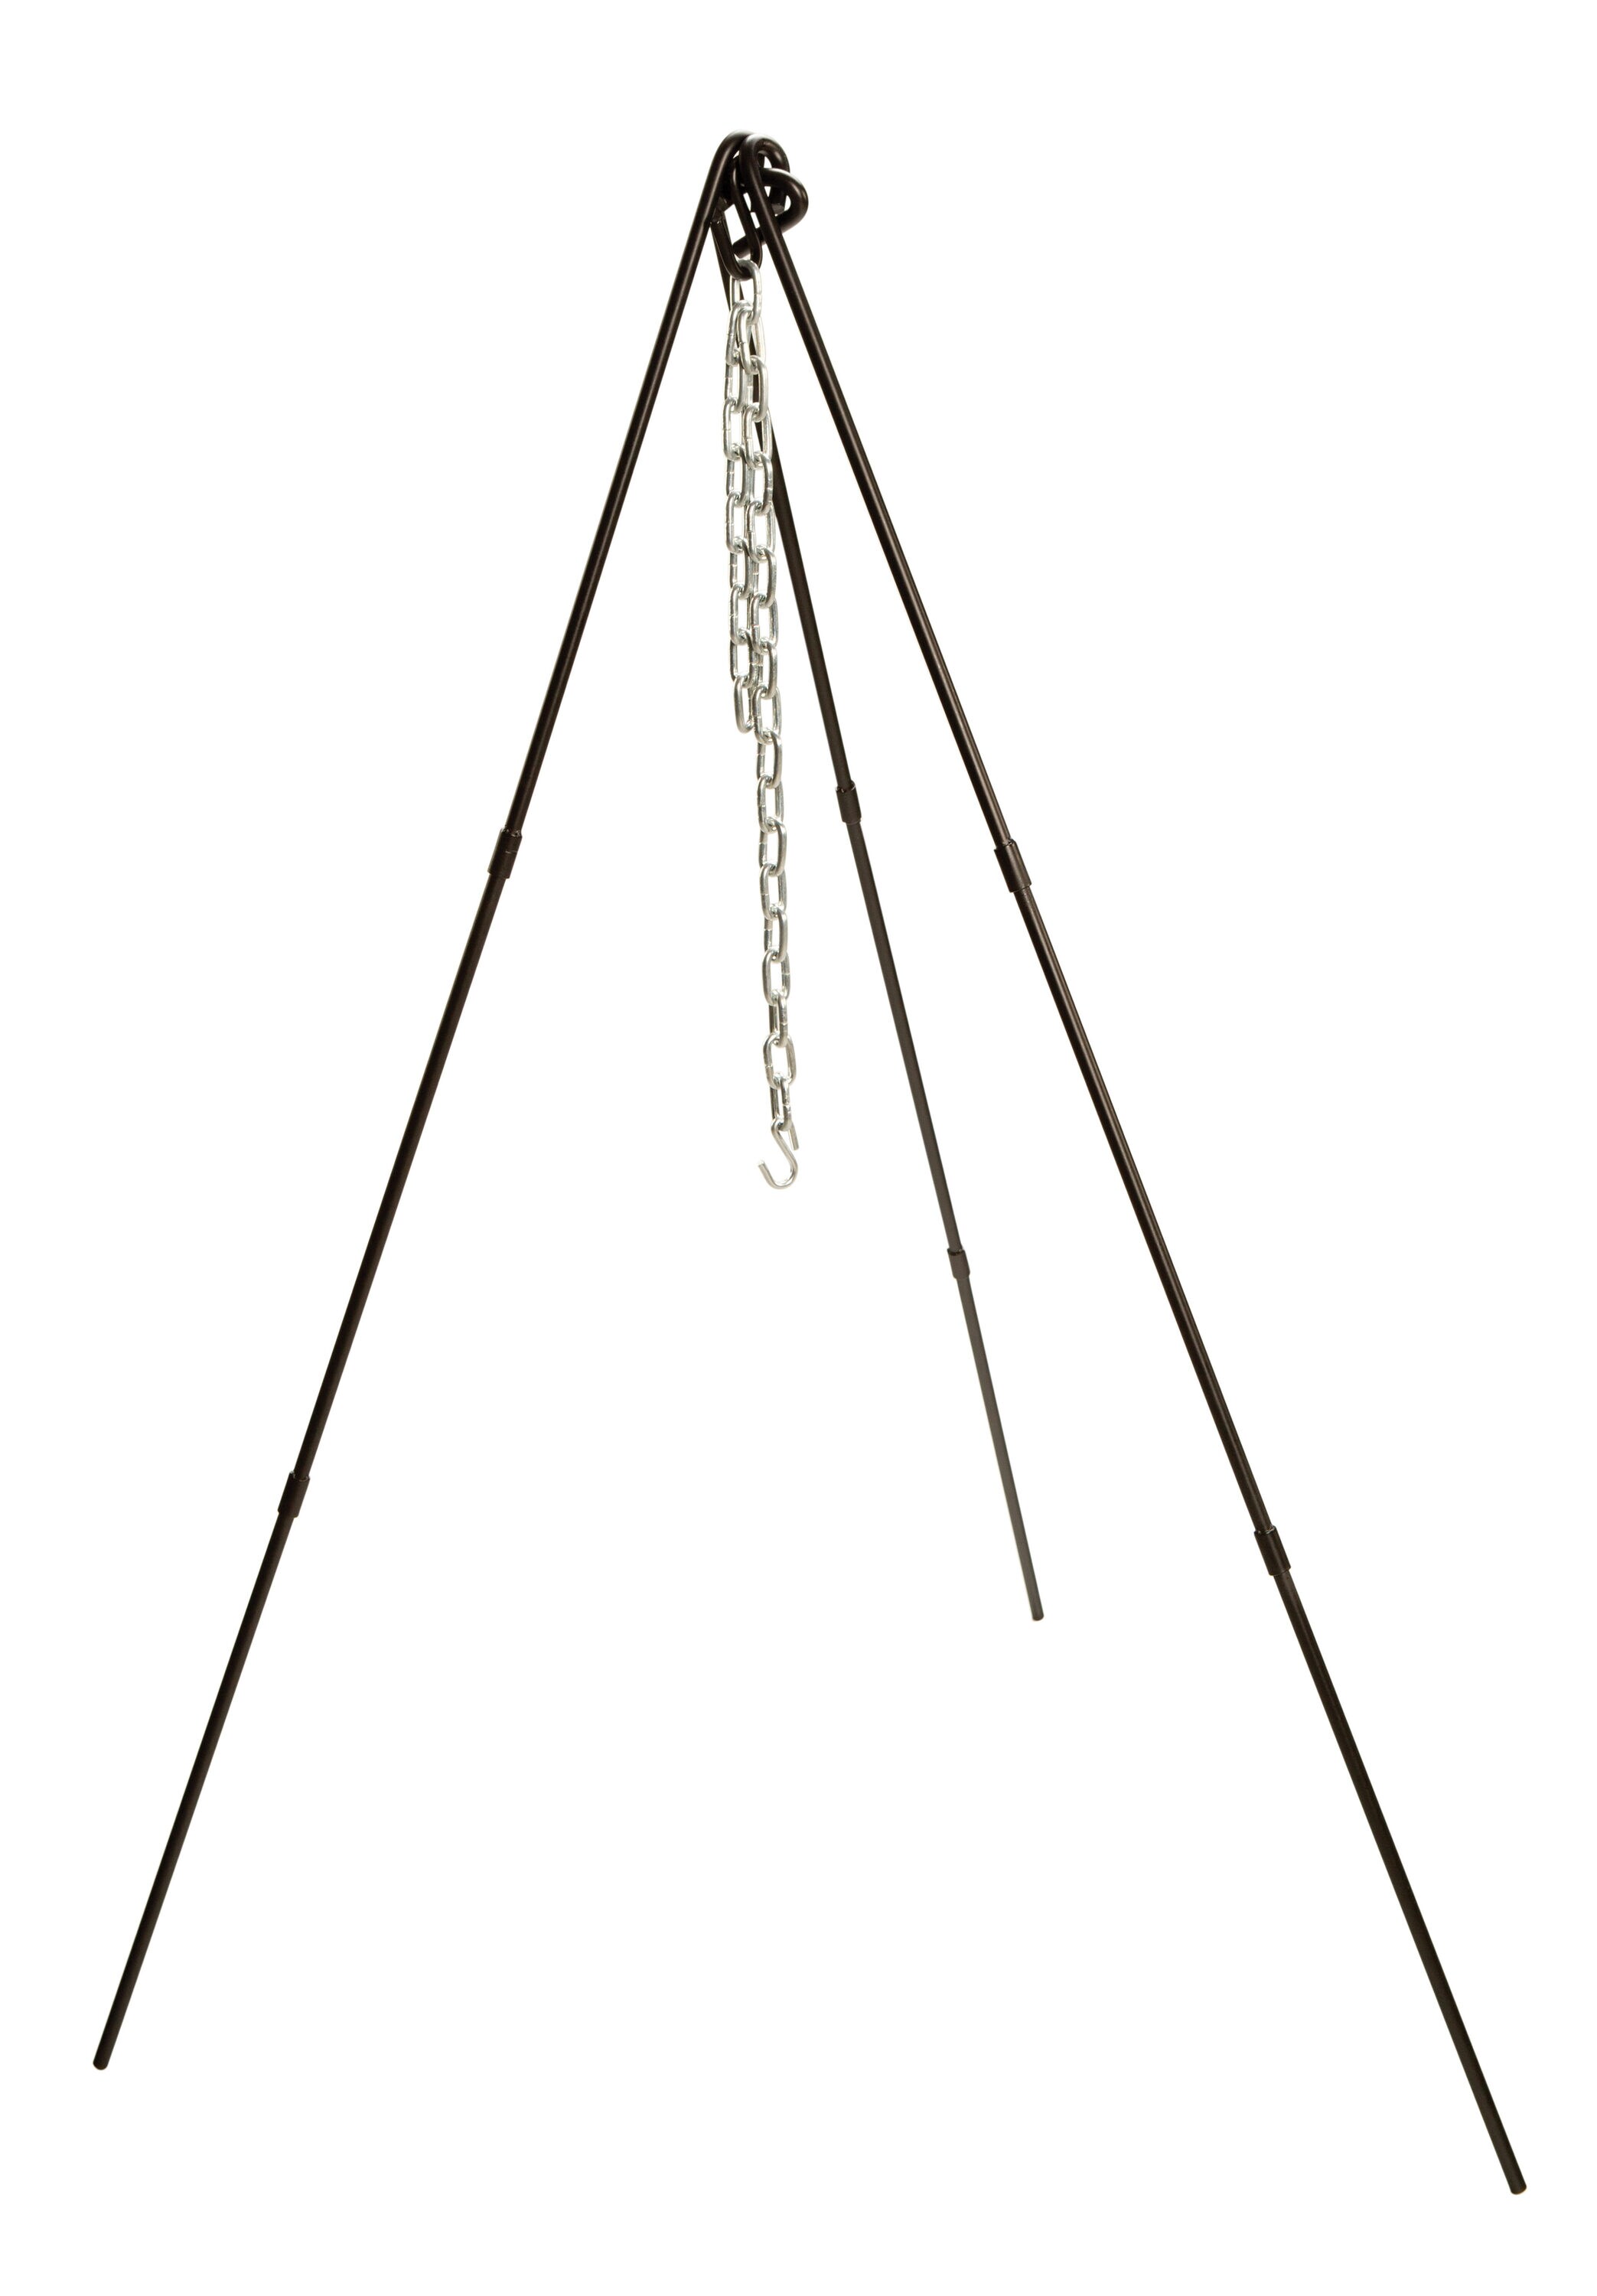 Lodge Adjustable Campfire Cooking Tripod 40-60 Hanging Chain and Carrying  Case